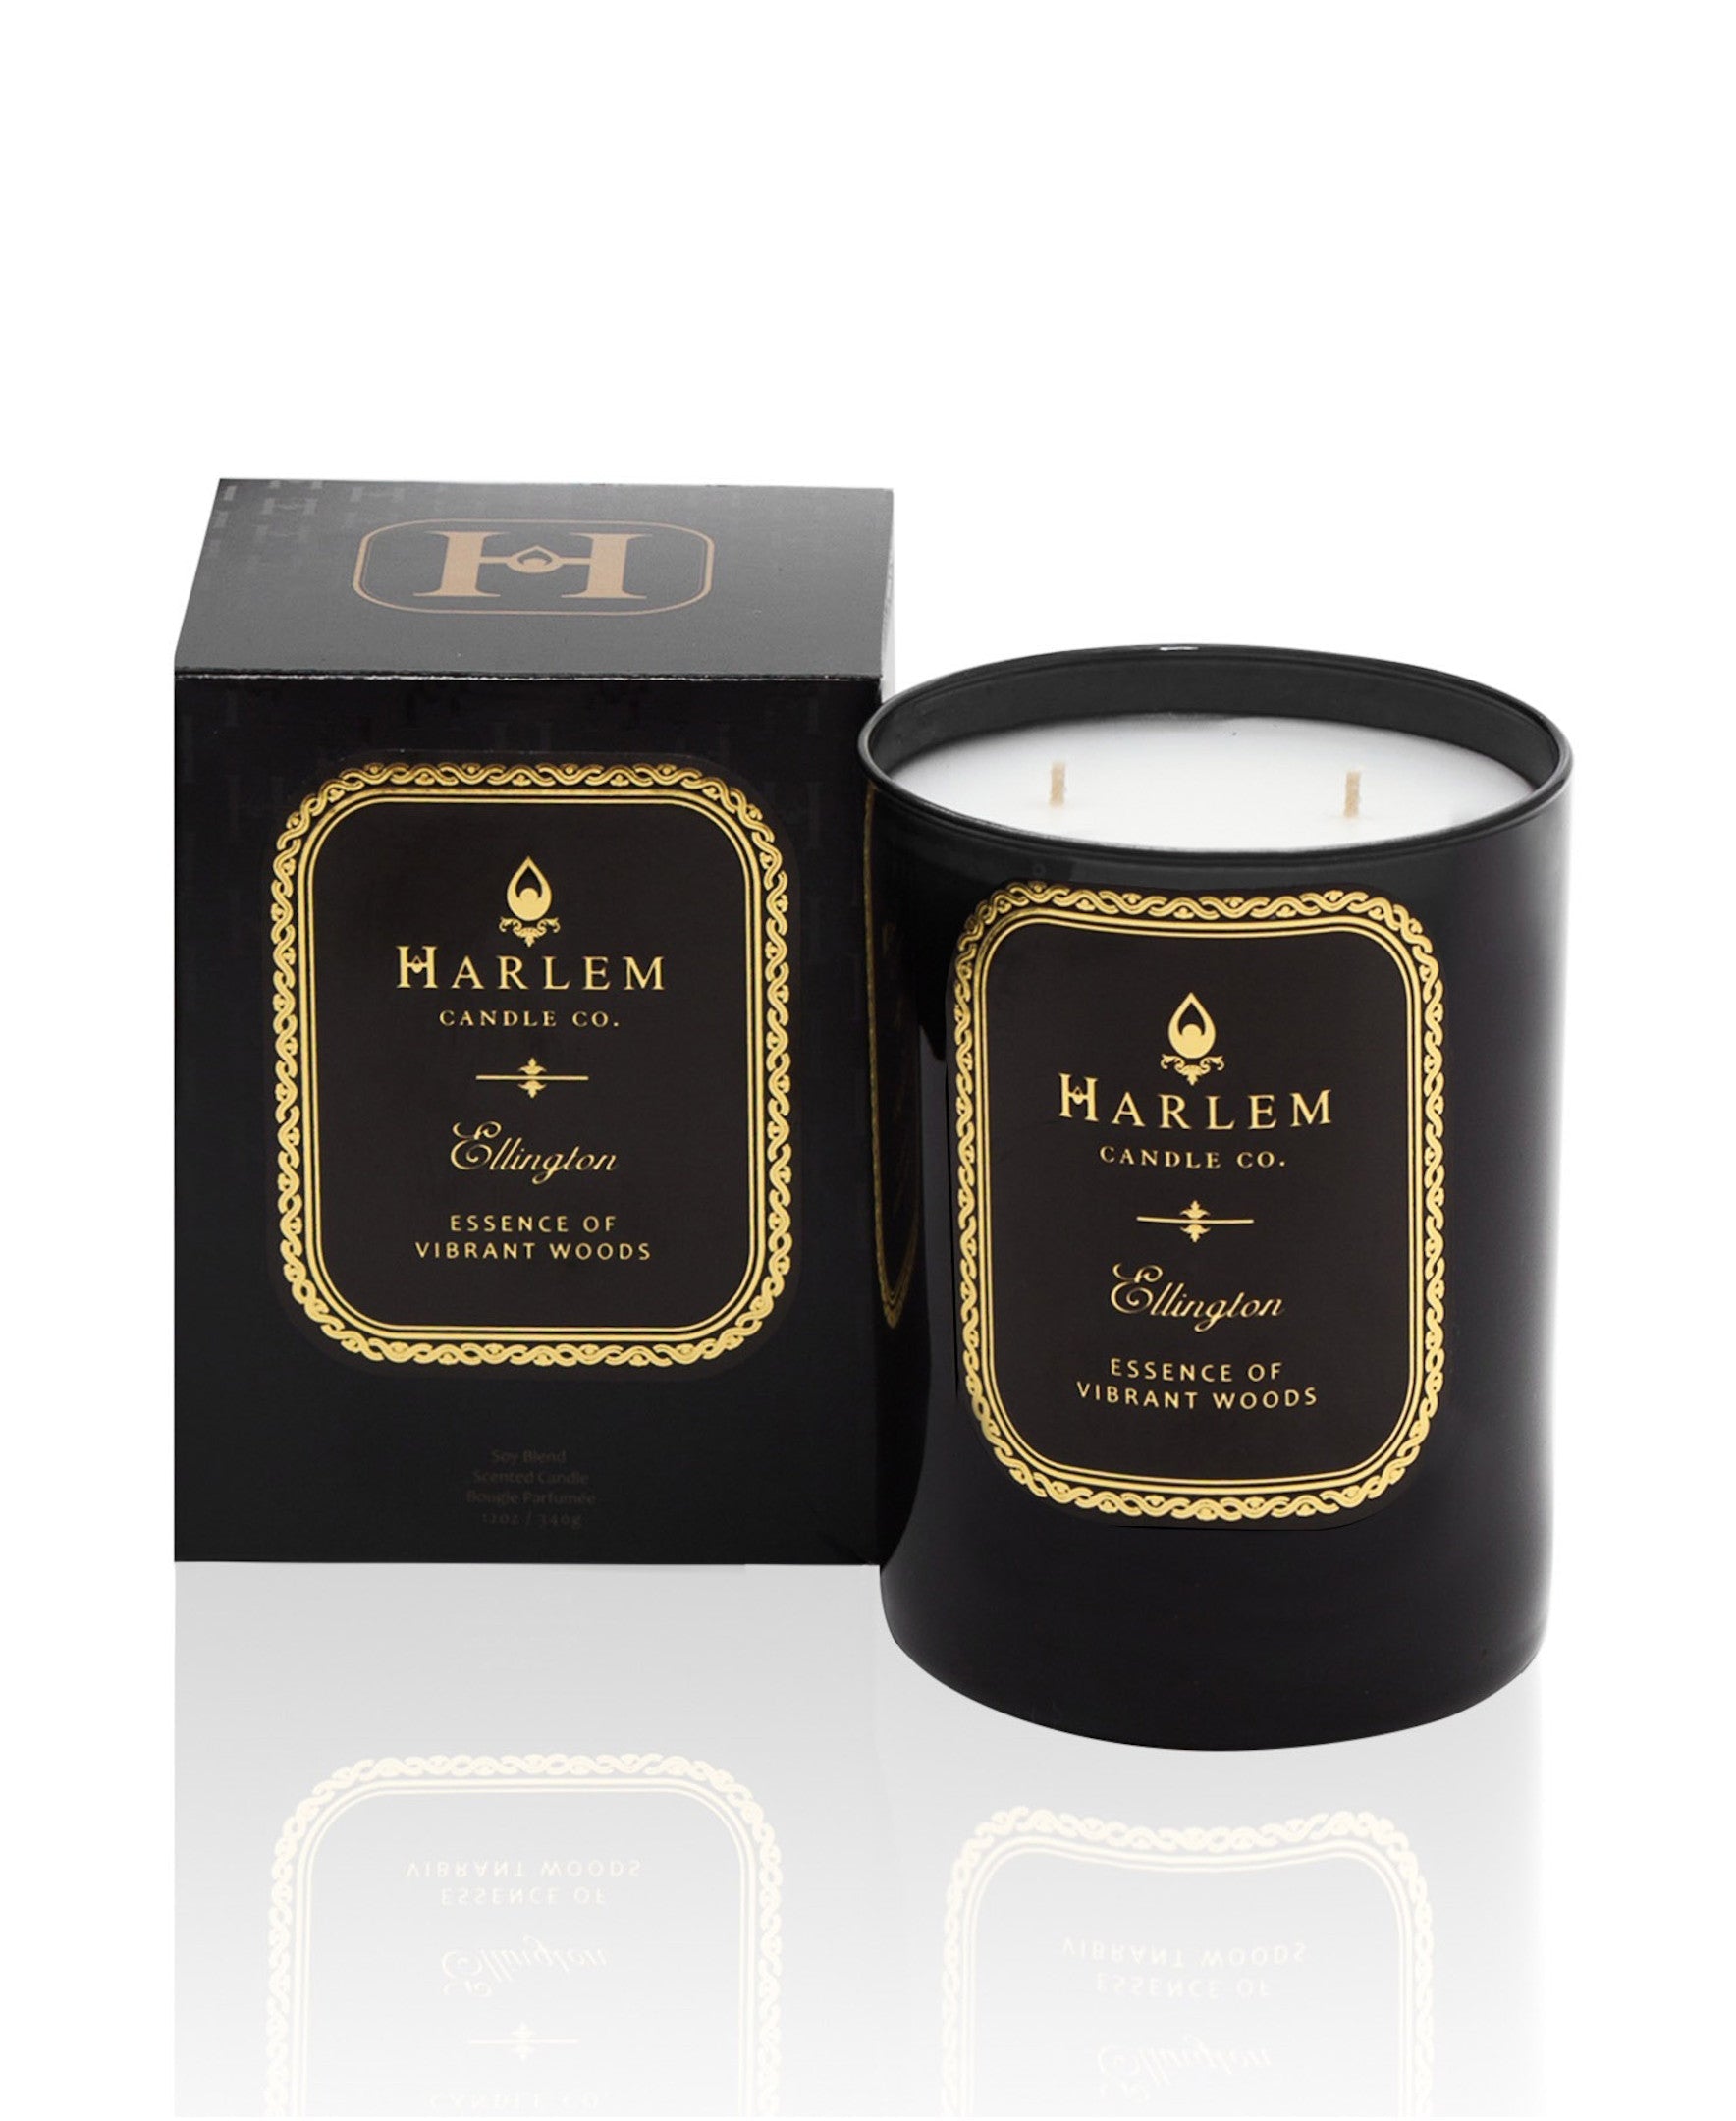 Our black Ellington 12 oz 2 wick candle with essence of vibrant woods sitting next to its decorative box.